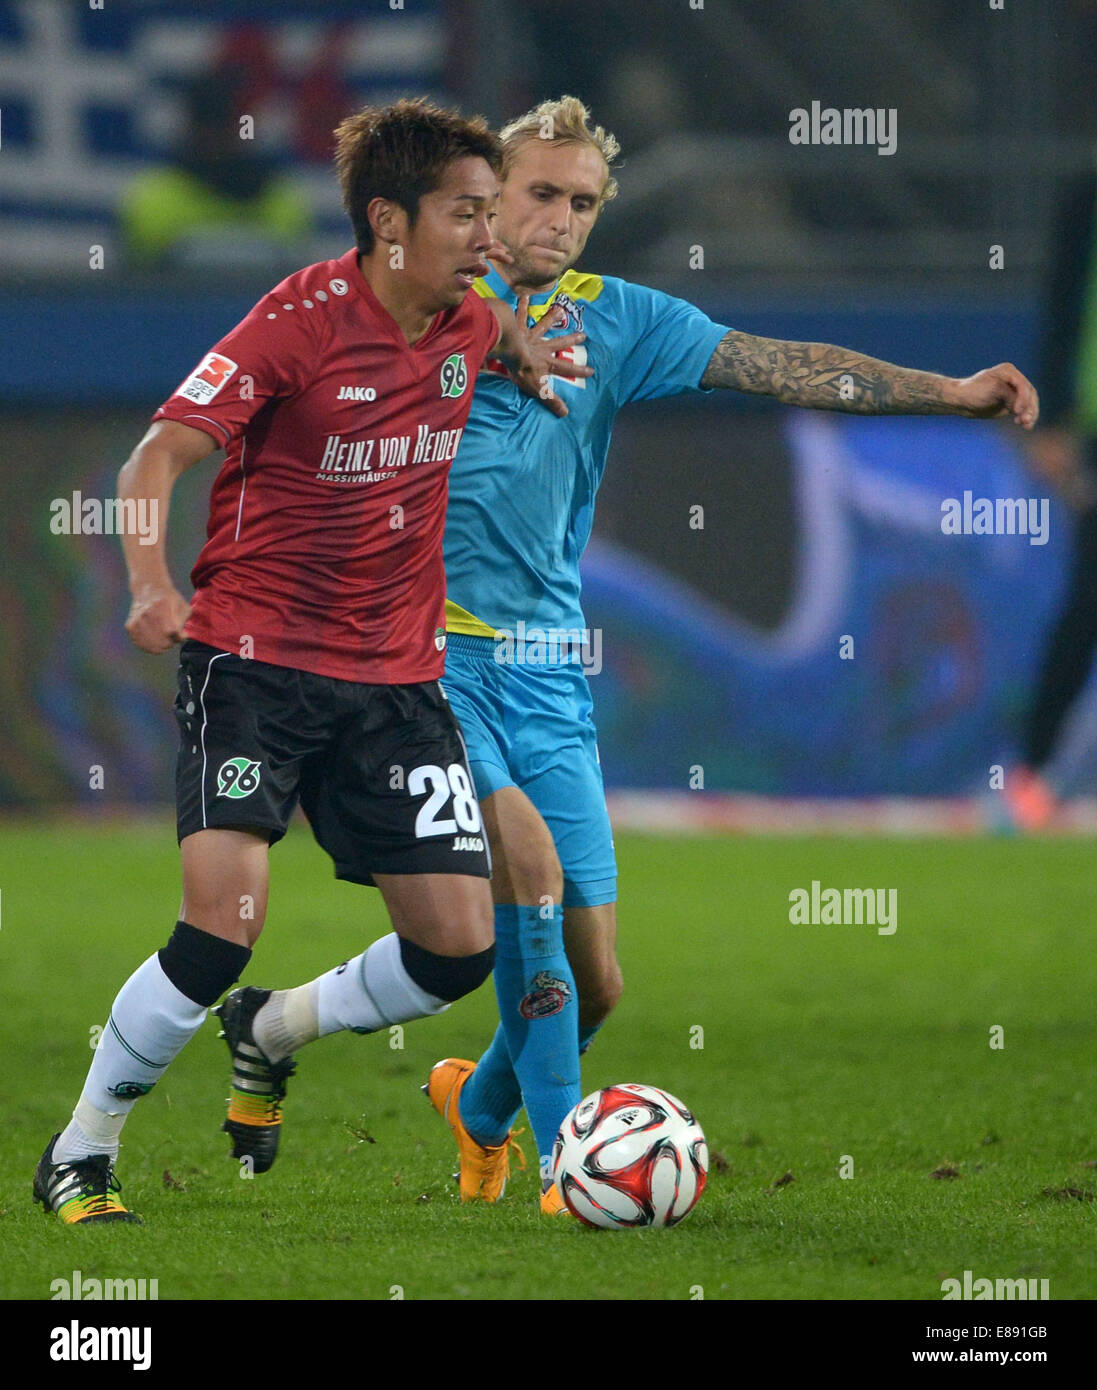 Hannover's Hiroshi Kiyotake and Koln's Marcel Risse fight for the ball at the Bundesliga game between Hannover 96 and FC Koln in the HDI Arena in Hanover, Germany, 24 September, 2014. Photo: Peter Steffen/dpa Stock Photo